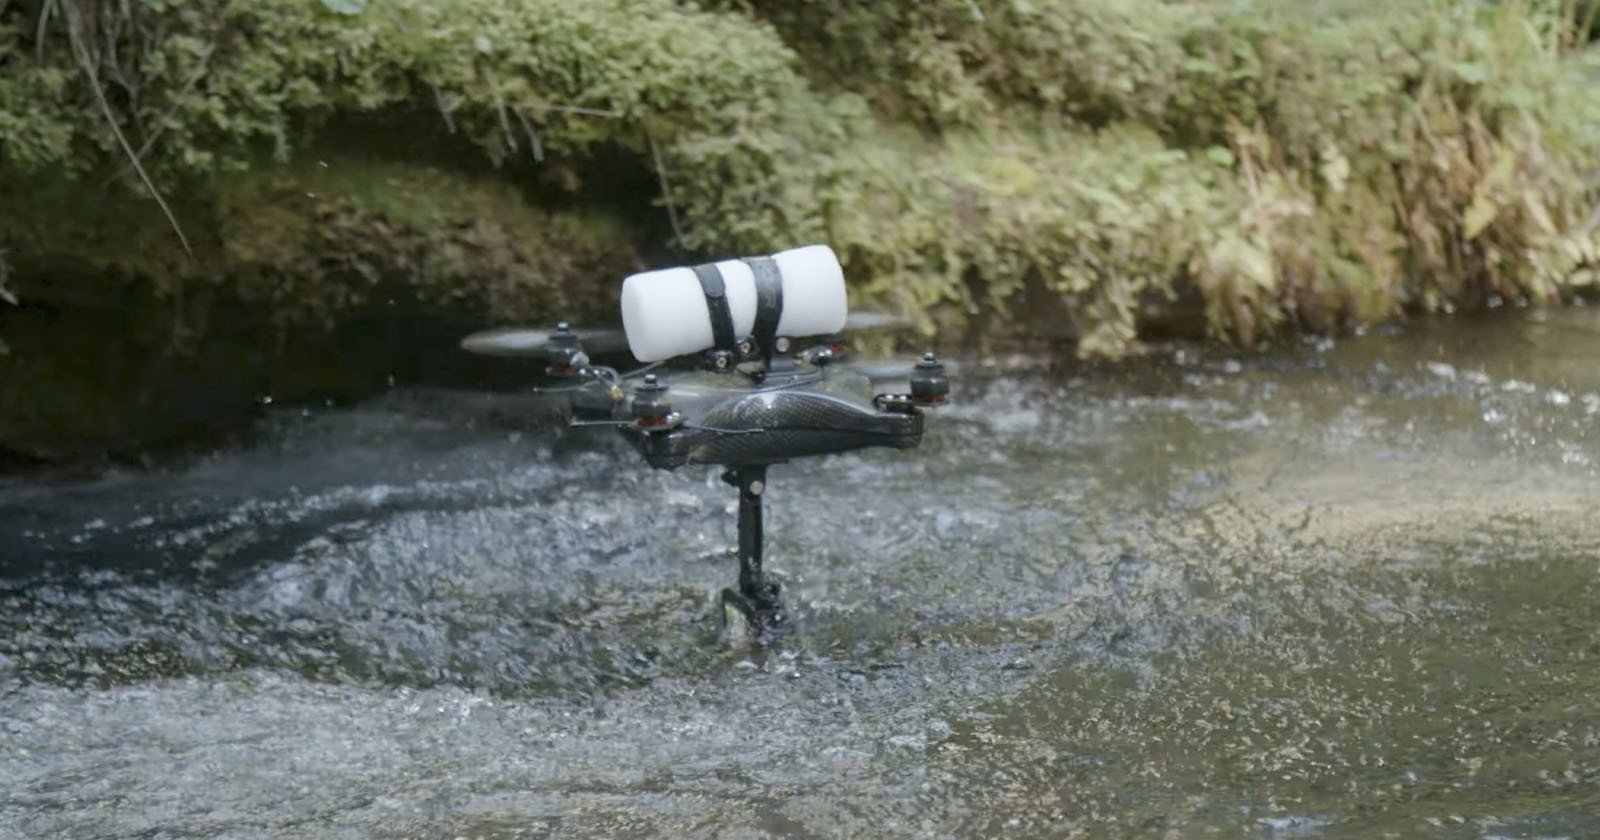 Submersible Drone Can Plunge Into a Waterfall, Reemerge, and Keep Flying